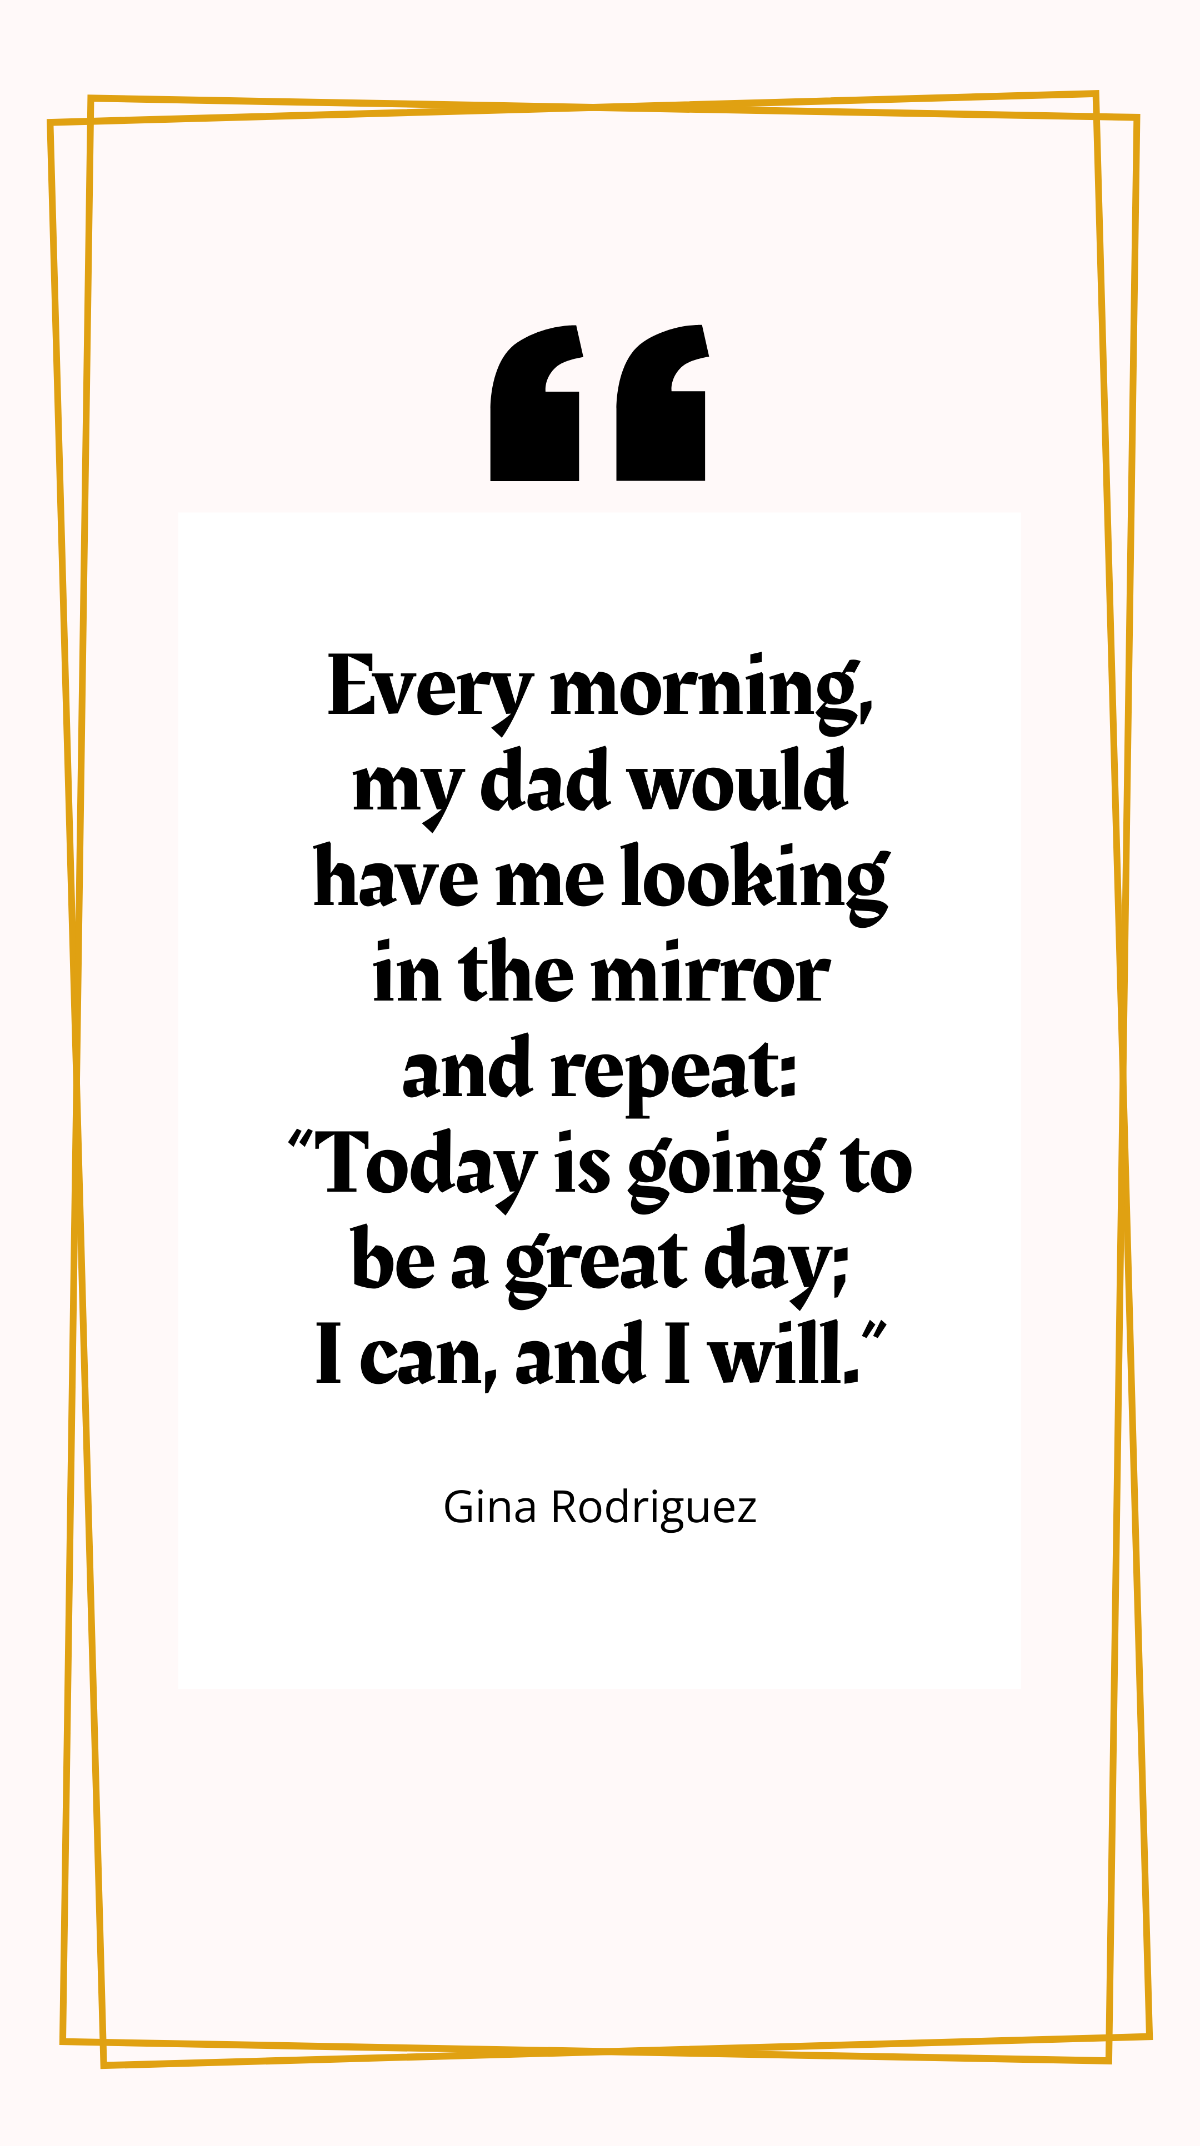 Gina Rodriguez - Every morning, my dad would have me looking in the mirror and repeat: “Today is going to be a great day; I can, and I will.” Template